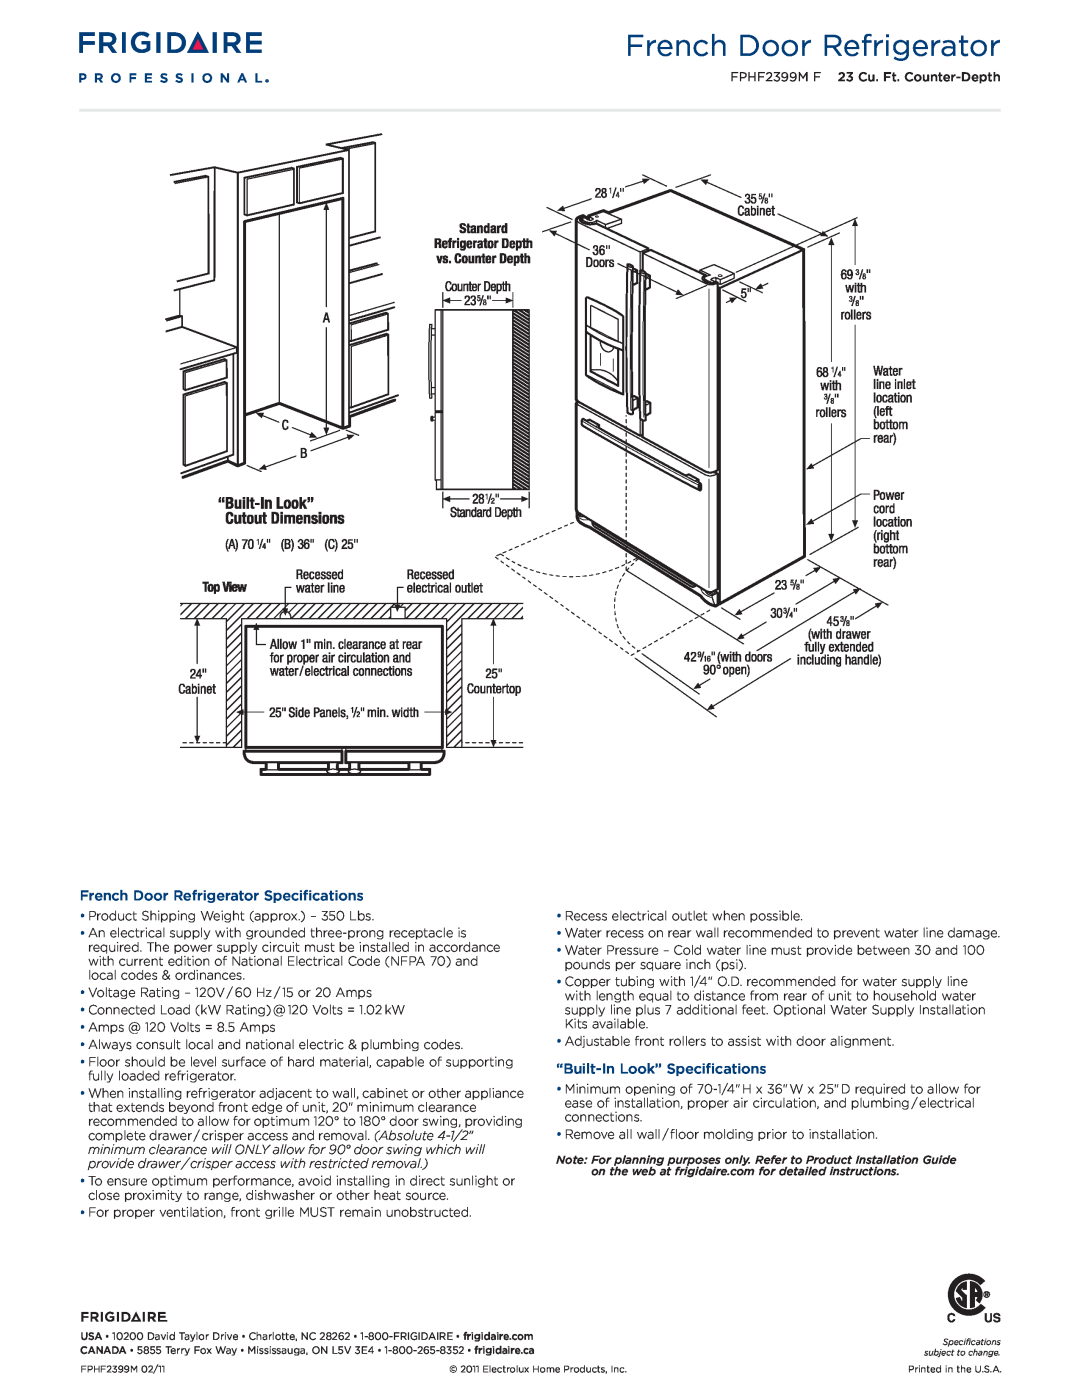 Frigidaire FPHF2399M F dimensions French Door Refrigerator Specifications, “Built-In Look” Specifications 